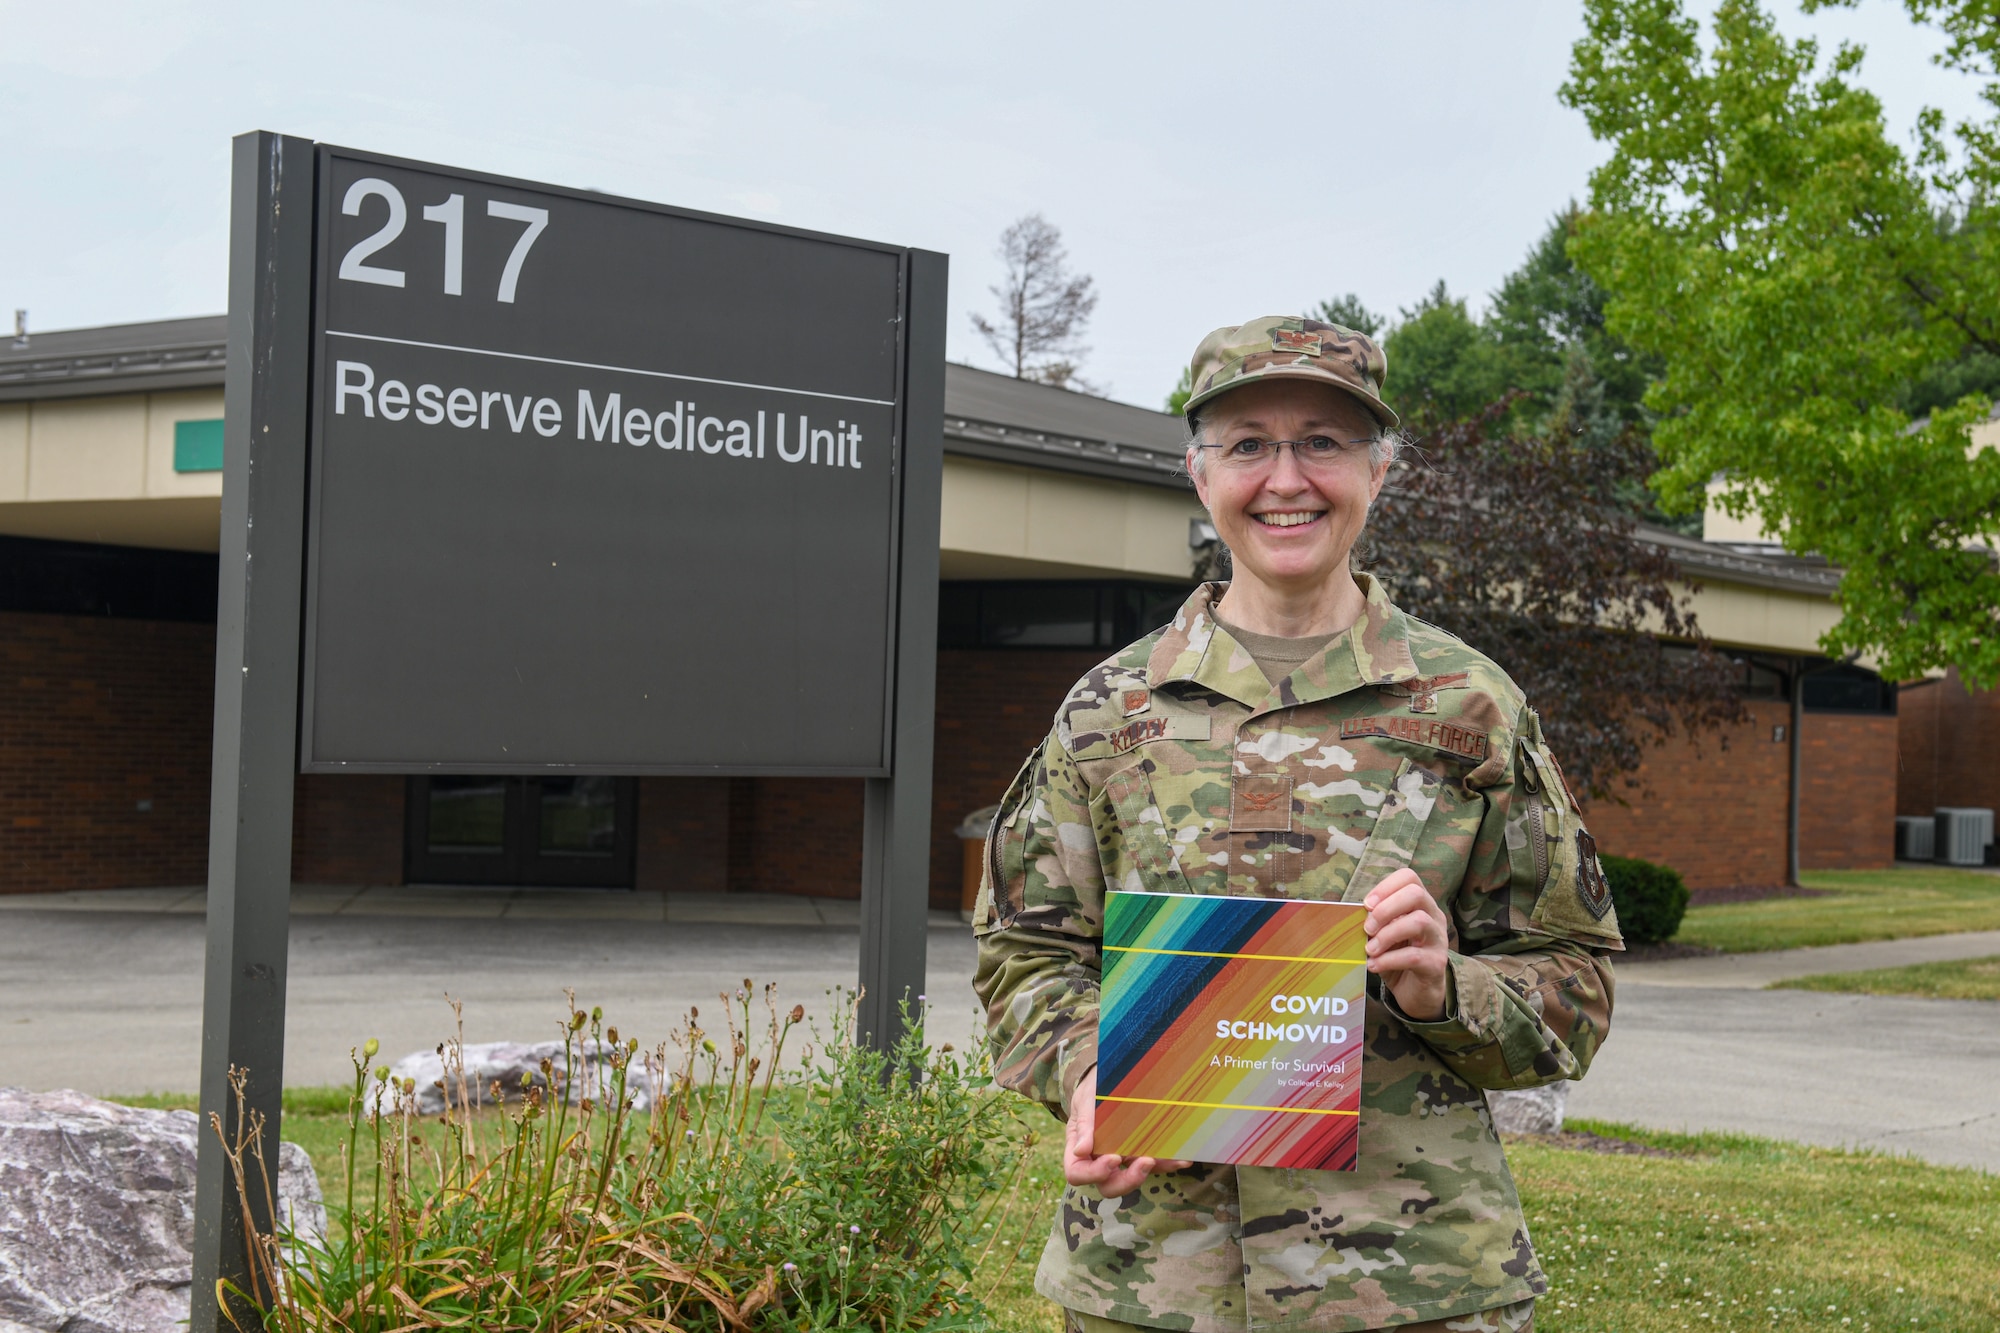 Col. Colleen Kelley, 910th Medical Squadron commander, poses with her recently published book, “COVID SCHMOVID”, Aug. 8, 2021, in front of the 910th Medical Squadron building at Youngstown Air Reserve Station.